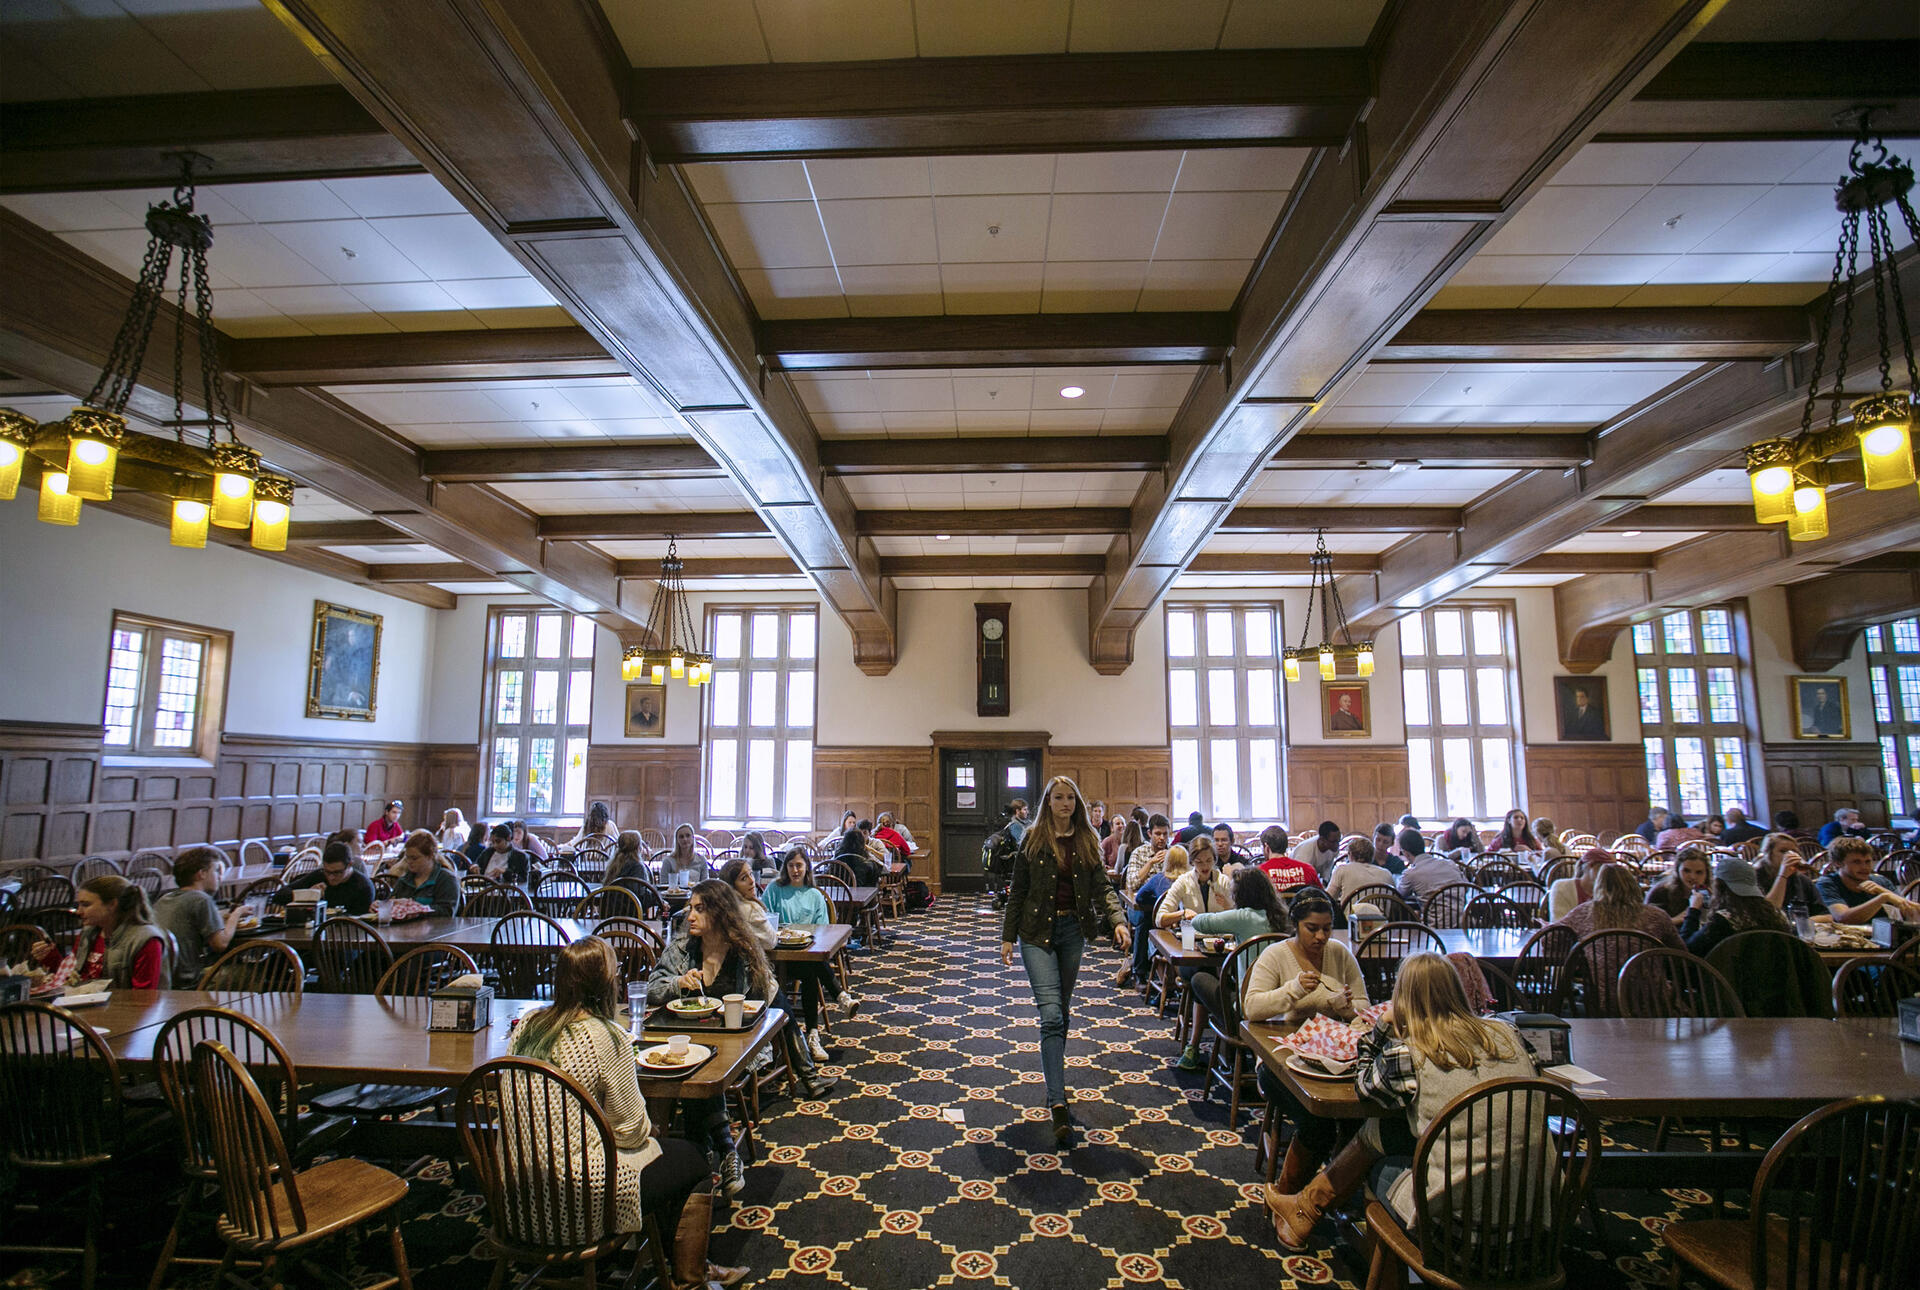 The main dining hall in the Catherine Burrow Refectory